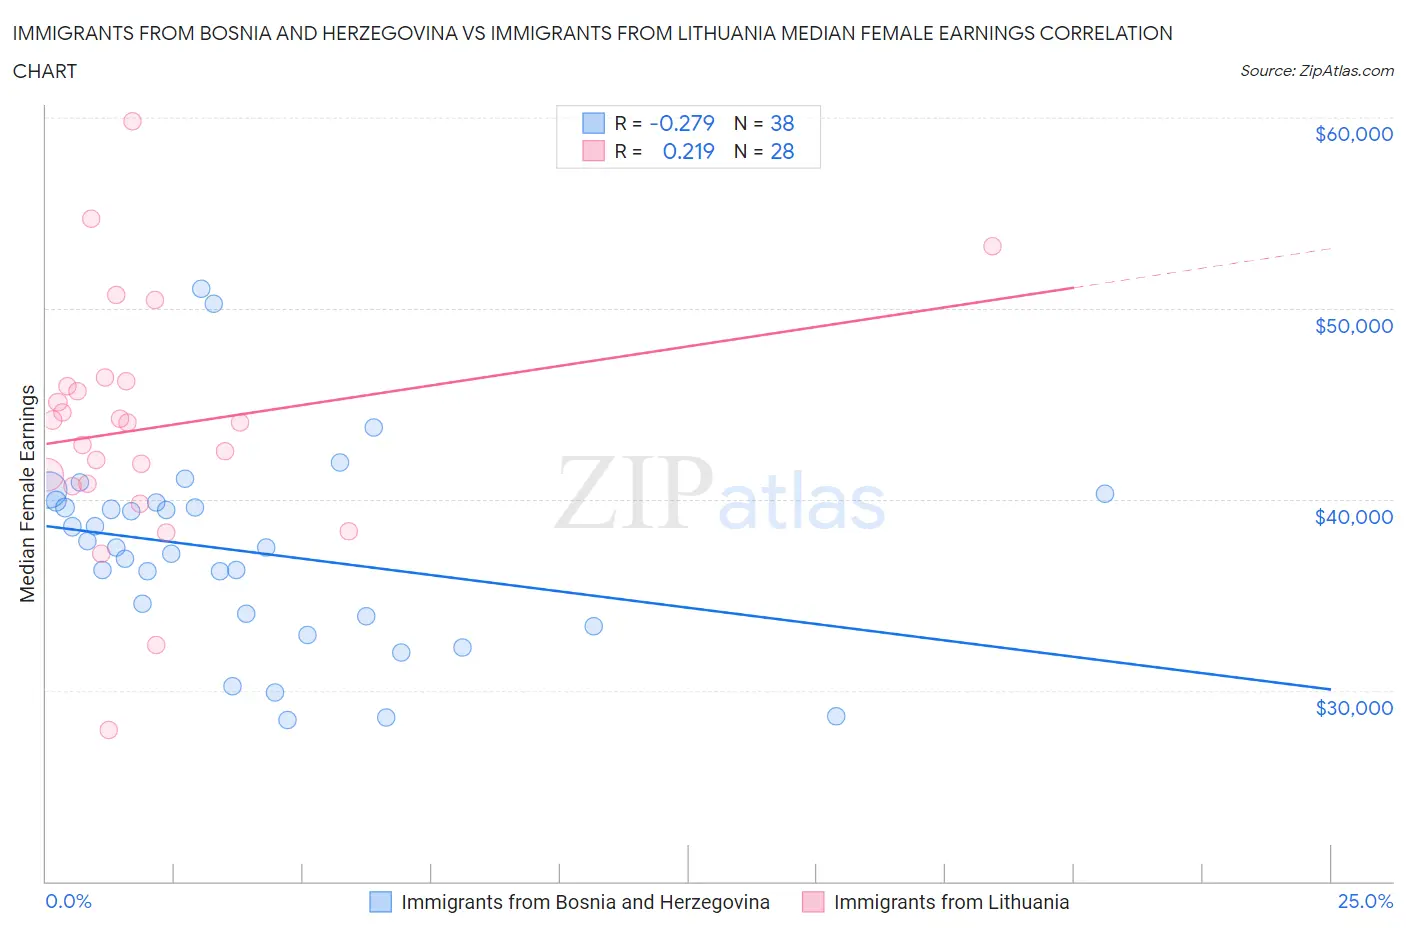 Immigrants from Bosnia and Herzegovina vs Immigrants from Lithuania Median Female Earnings